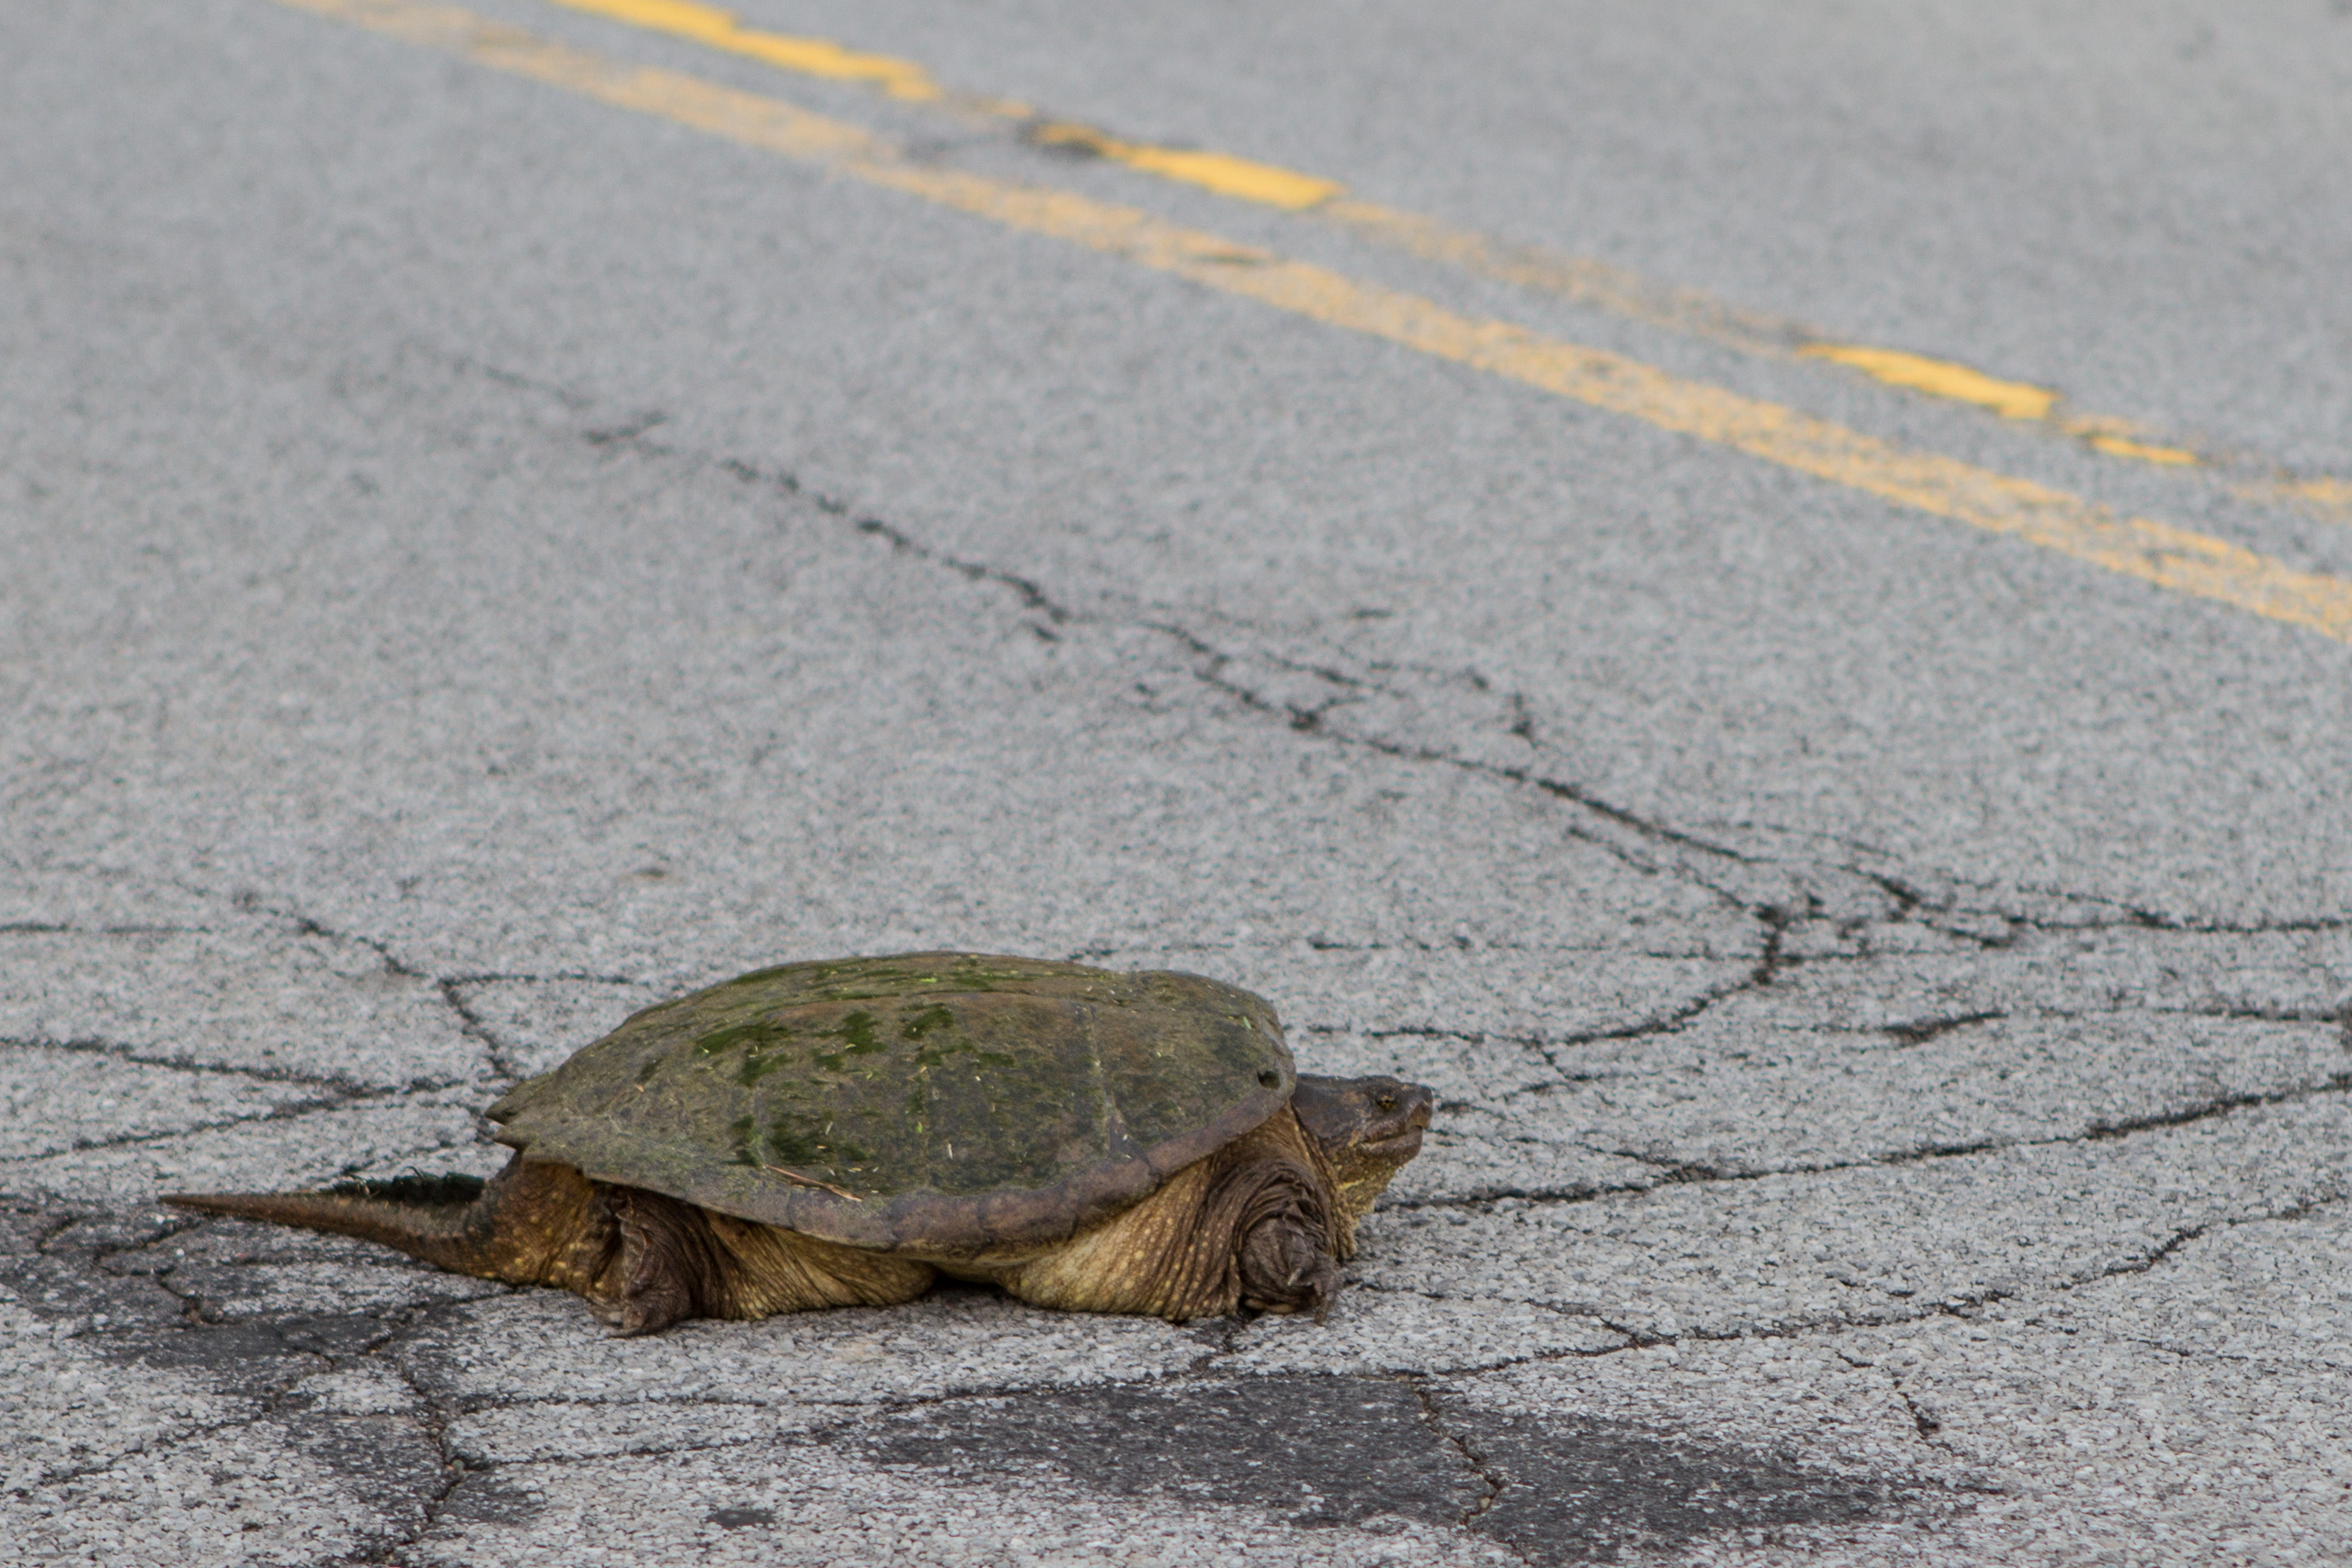 Common snapping turtle crossing the road